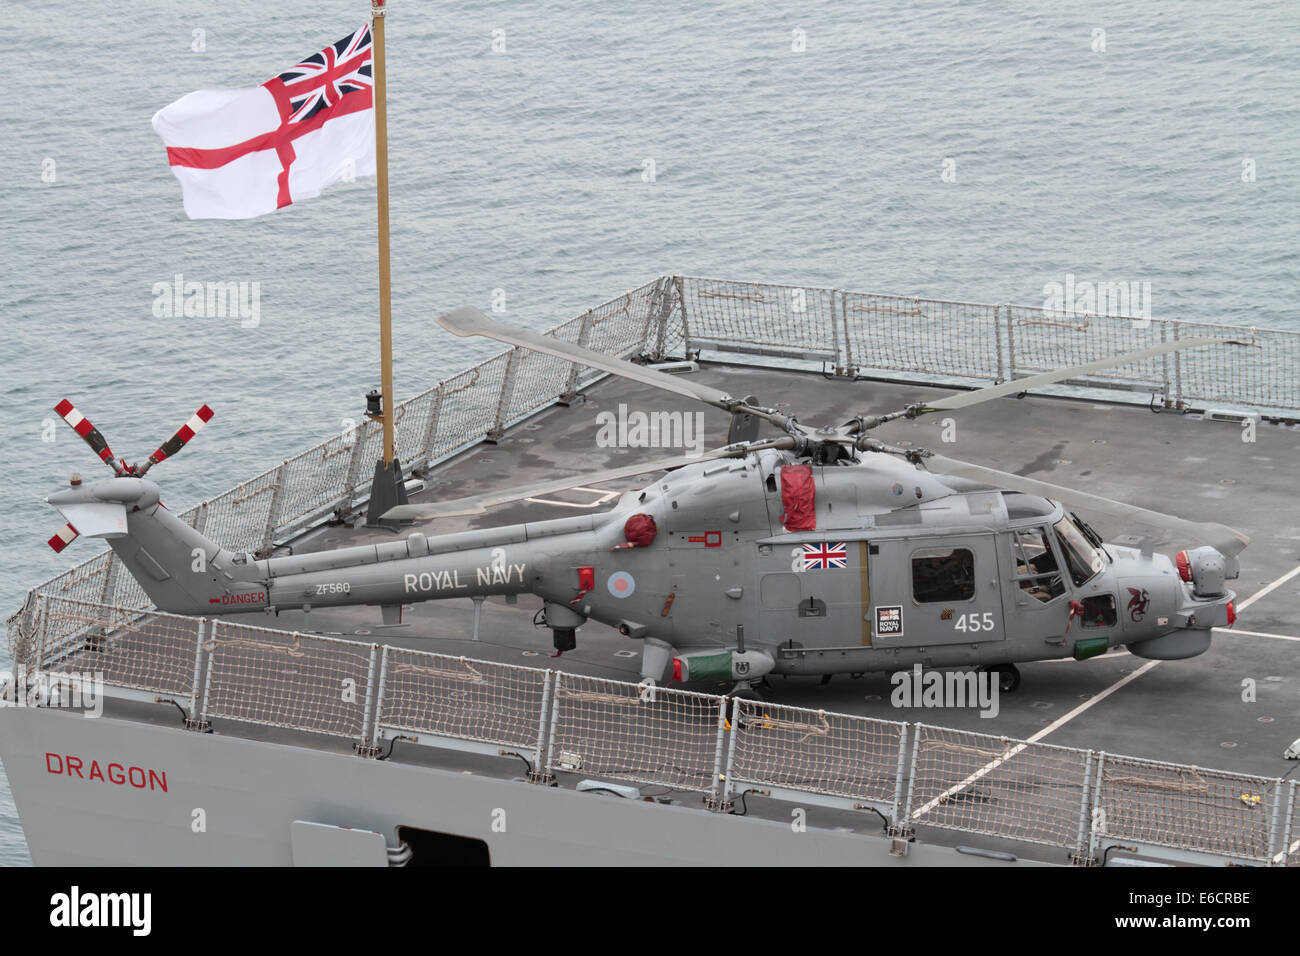 Helicopter on deck of ship. Westland Lynx HMA8 military aircraft on the stern of the Royal Navy destroyer HMS Dragon beneath a flying White Ensign Stock Photo